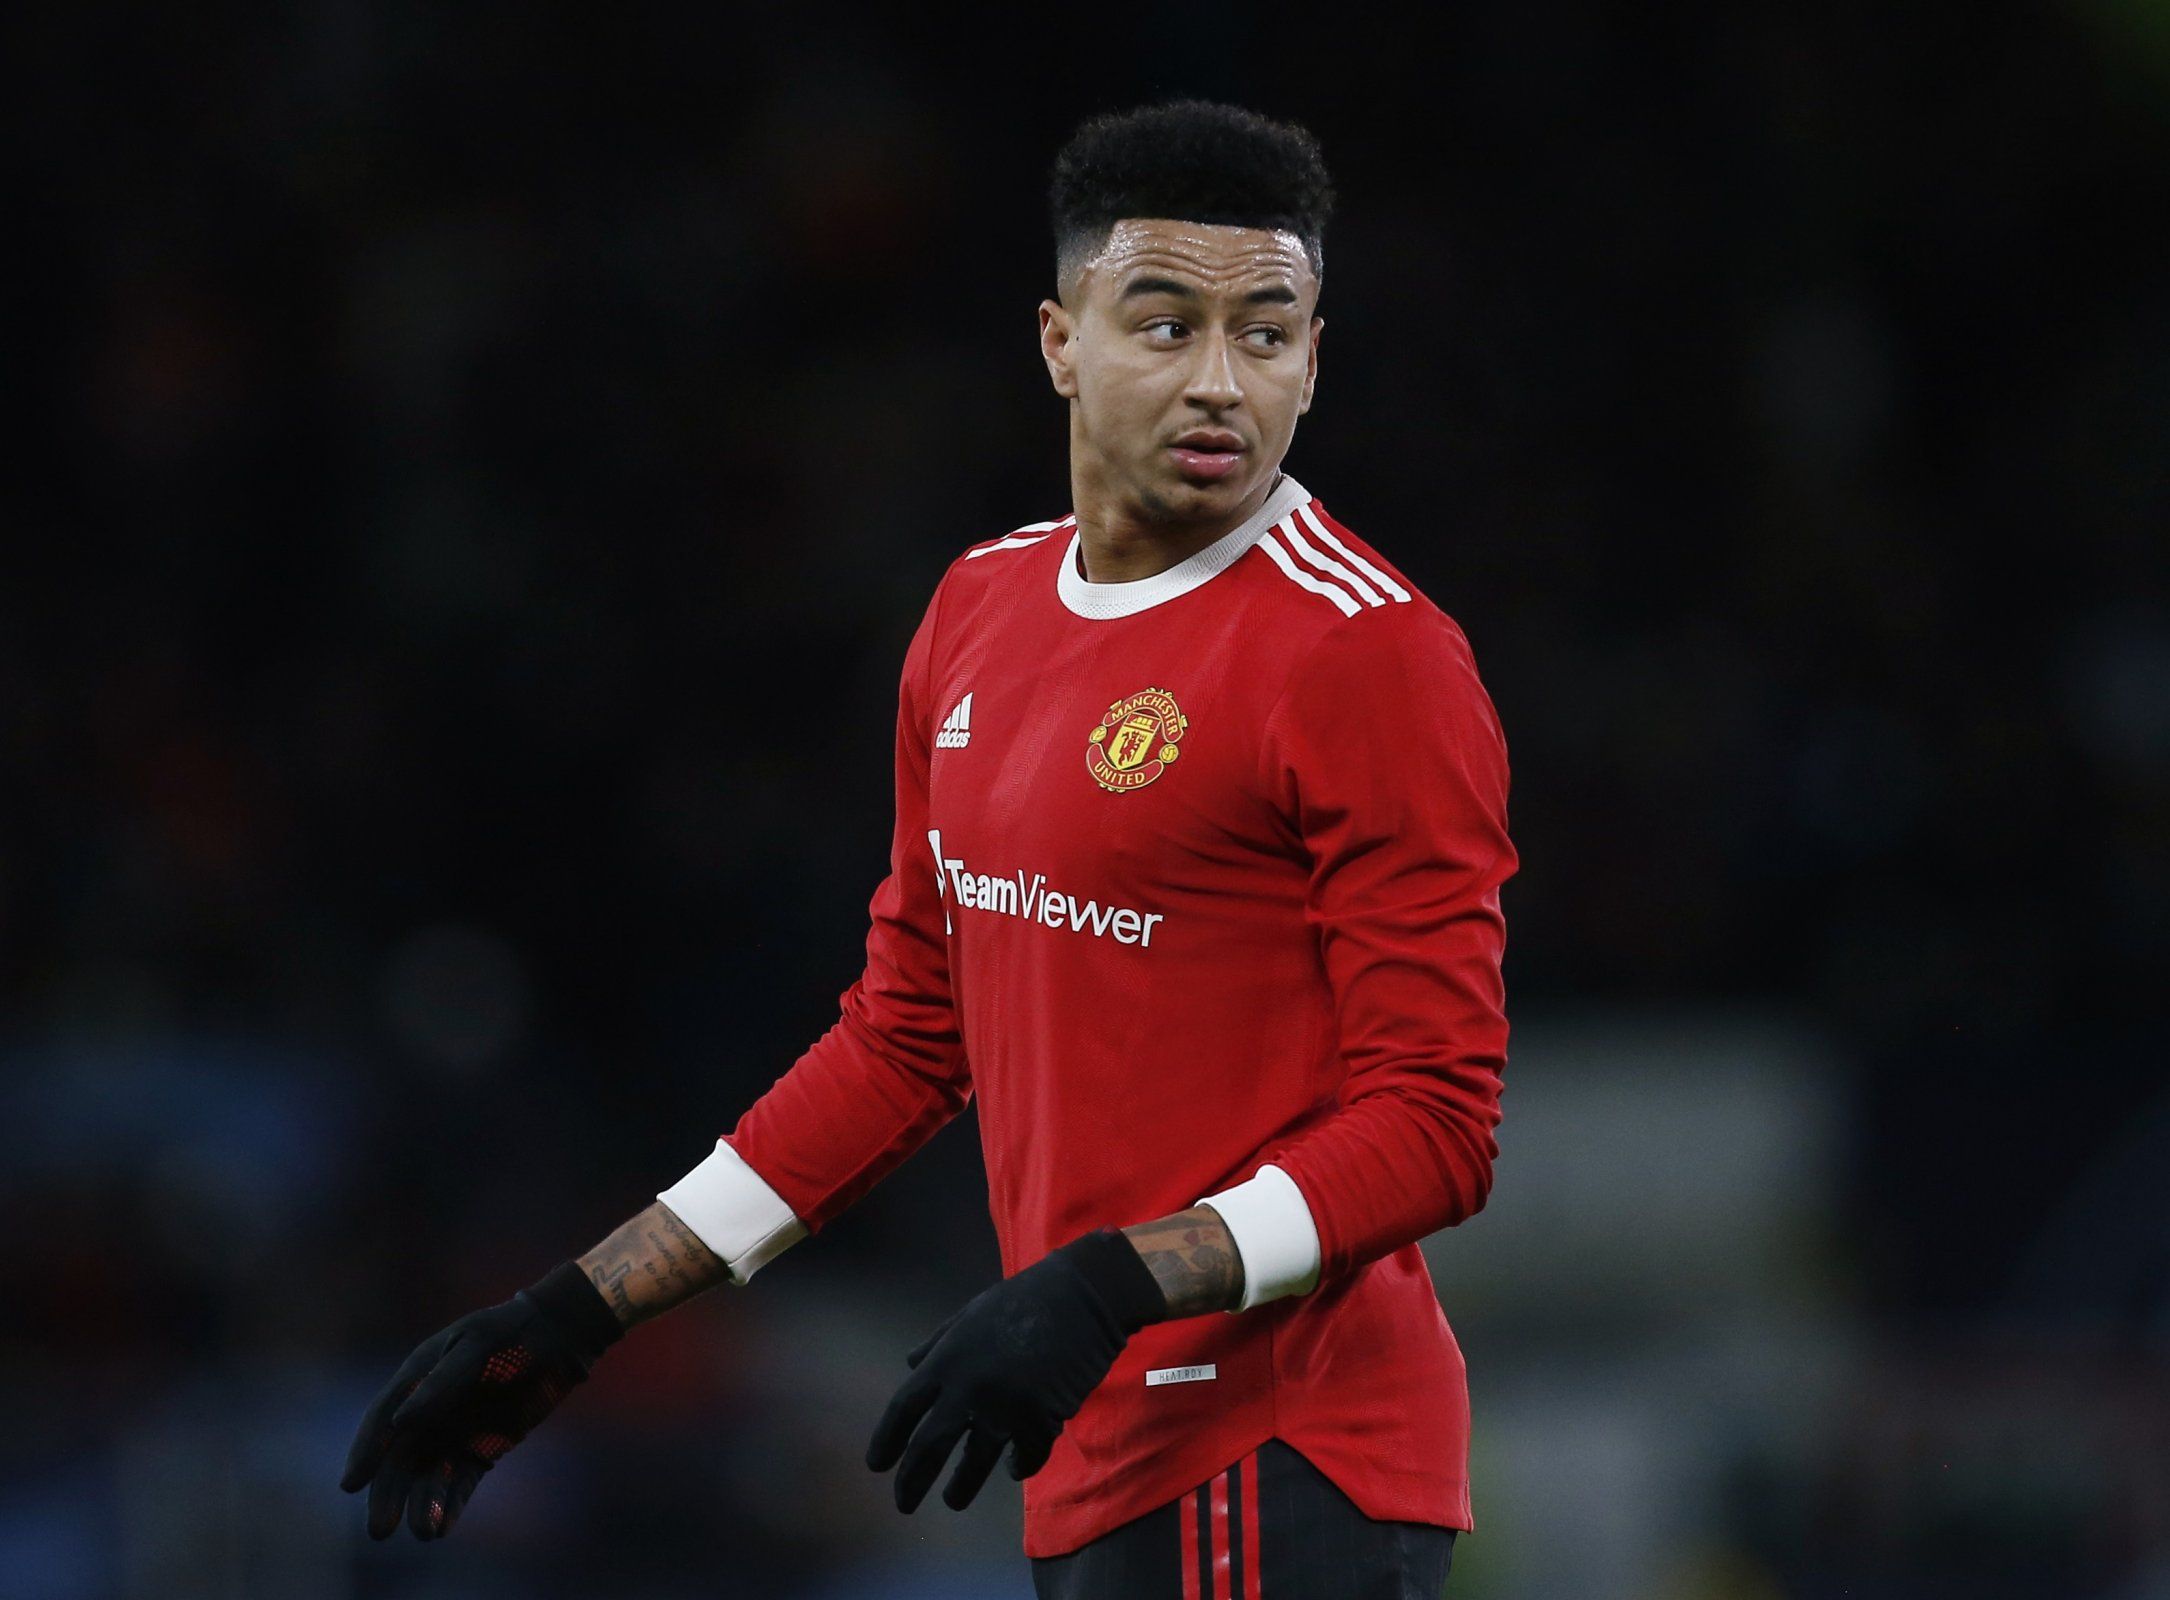 Newcastle United, Newcastle, Magpies, Toon Army, St James' Park, PIF, Eddie Howe, Premier League, Jesse Lingard, England, Manchester United, Newcastle Transfers, Newcastle Transfer News, Newcastle United Transfers, Manchester United Transfers,